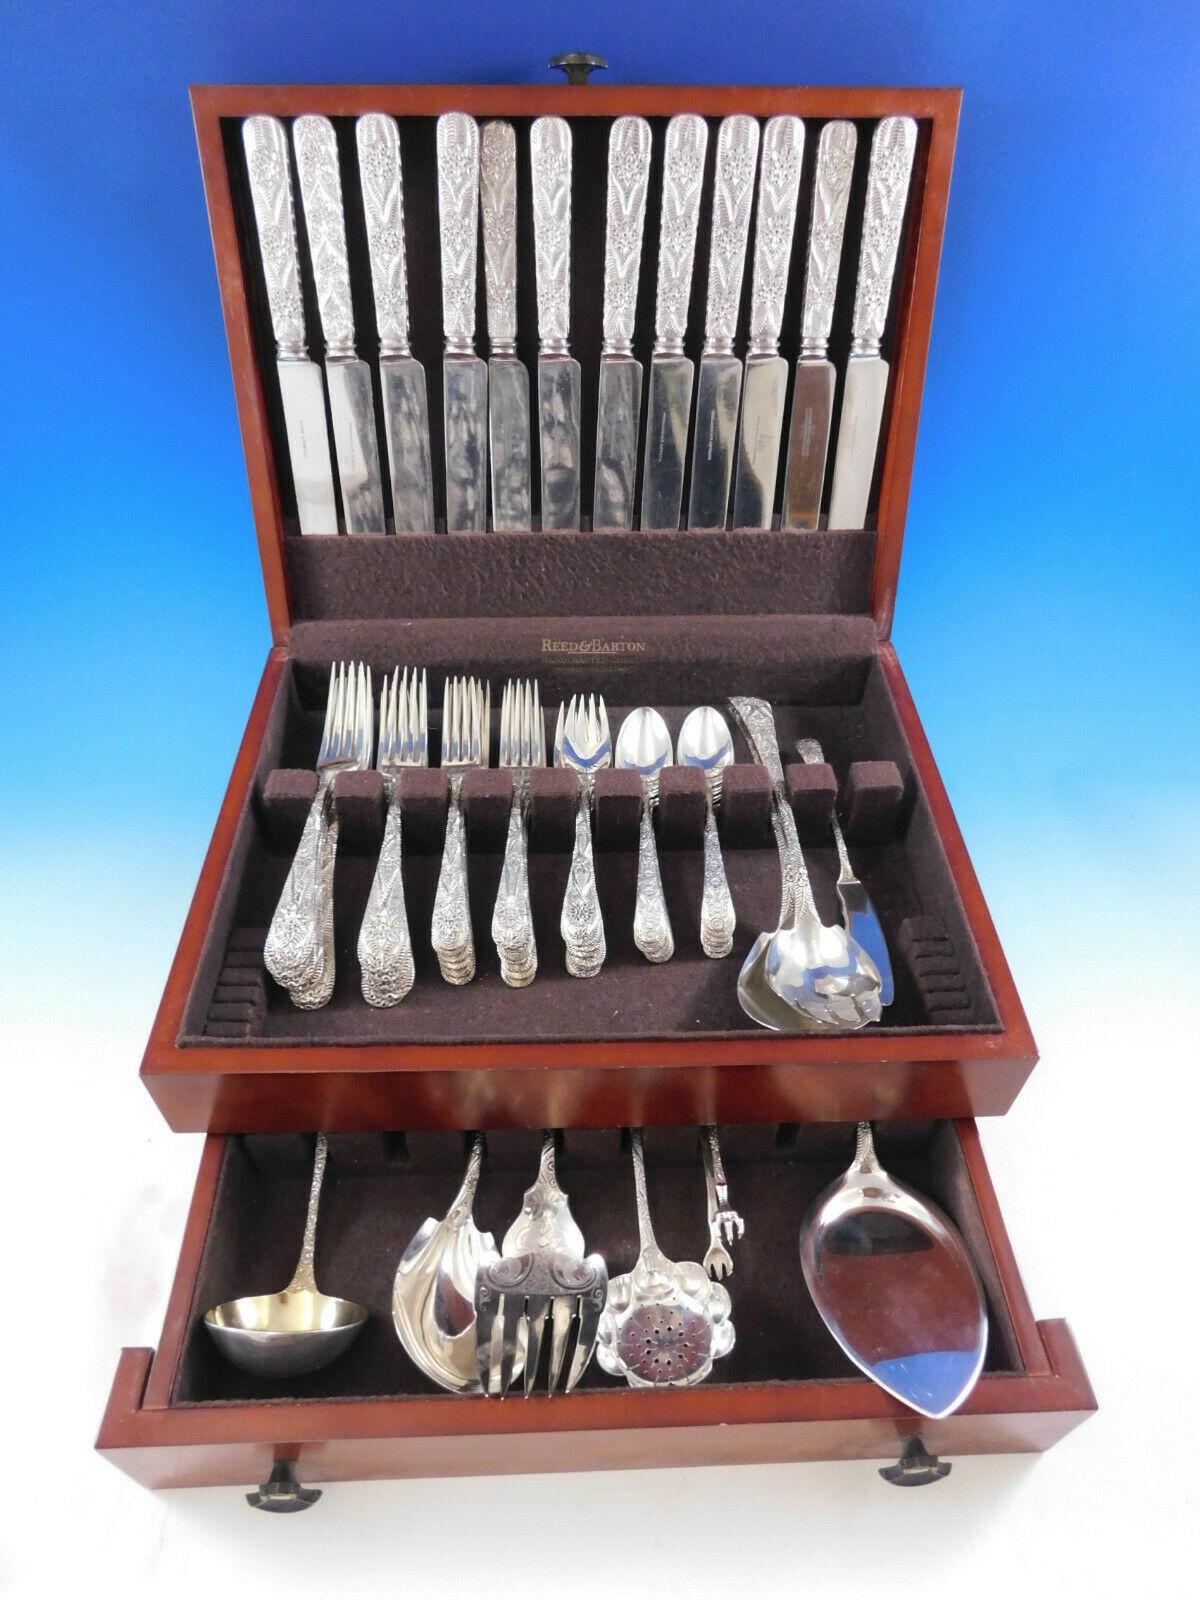 Exceedingly rare antique engraved aka custom engraved by Tiffany & Co. sterling silver flatware set with intricately hand engraved design, 62 pieces. This set includes:

12 large banquet knives with blunt plated blades, 10 1/2